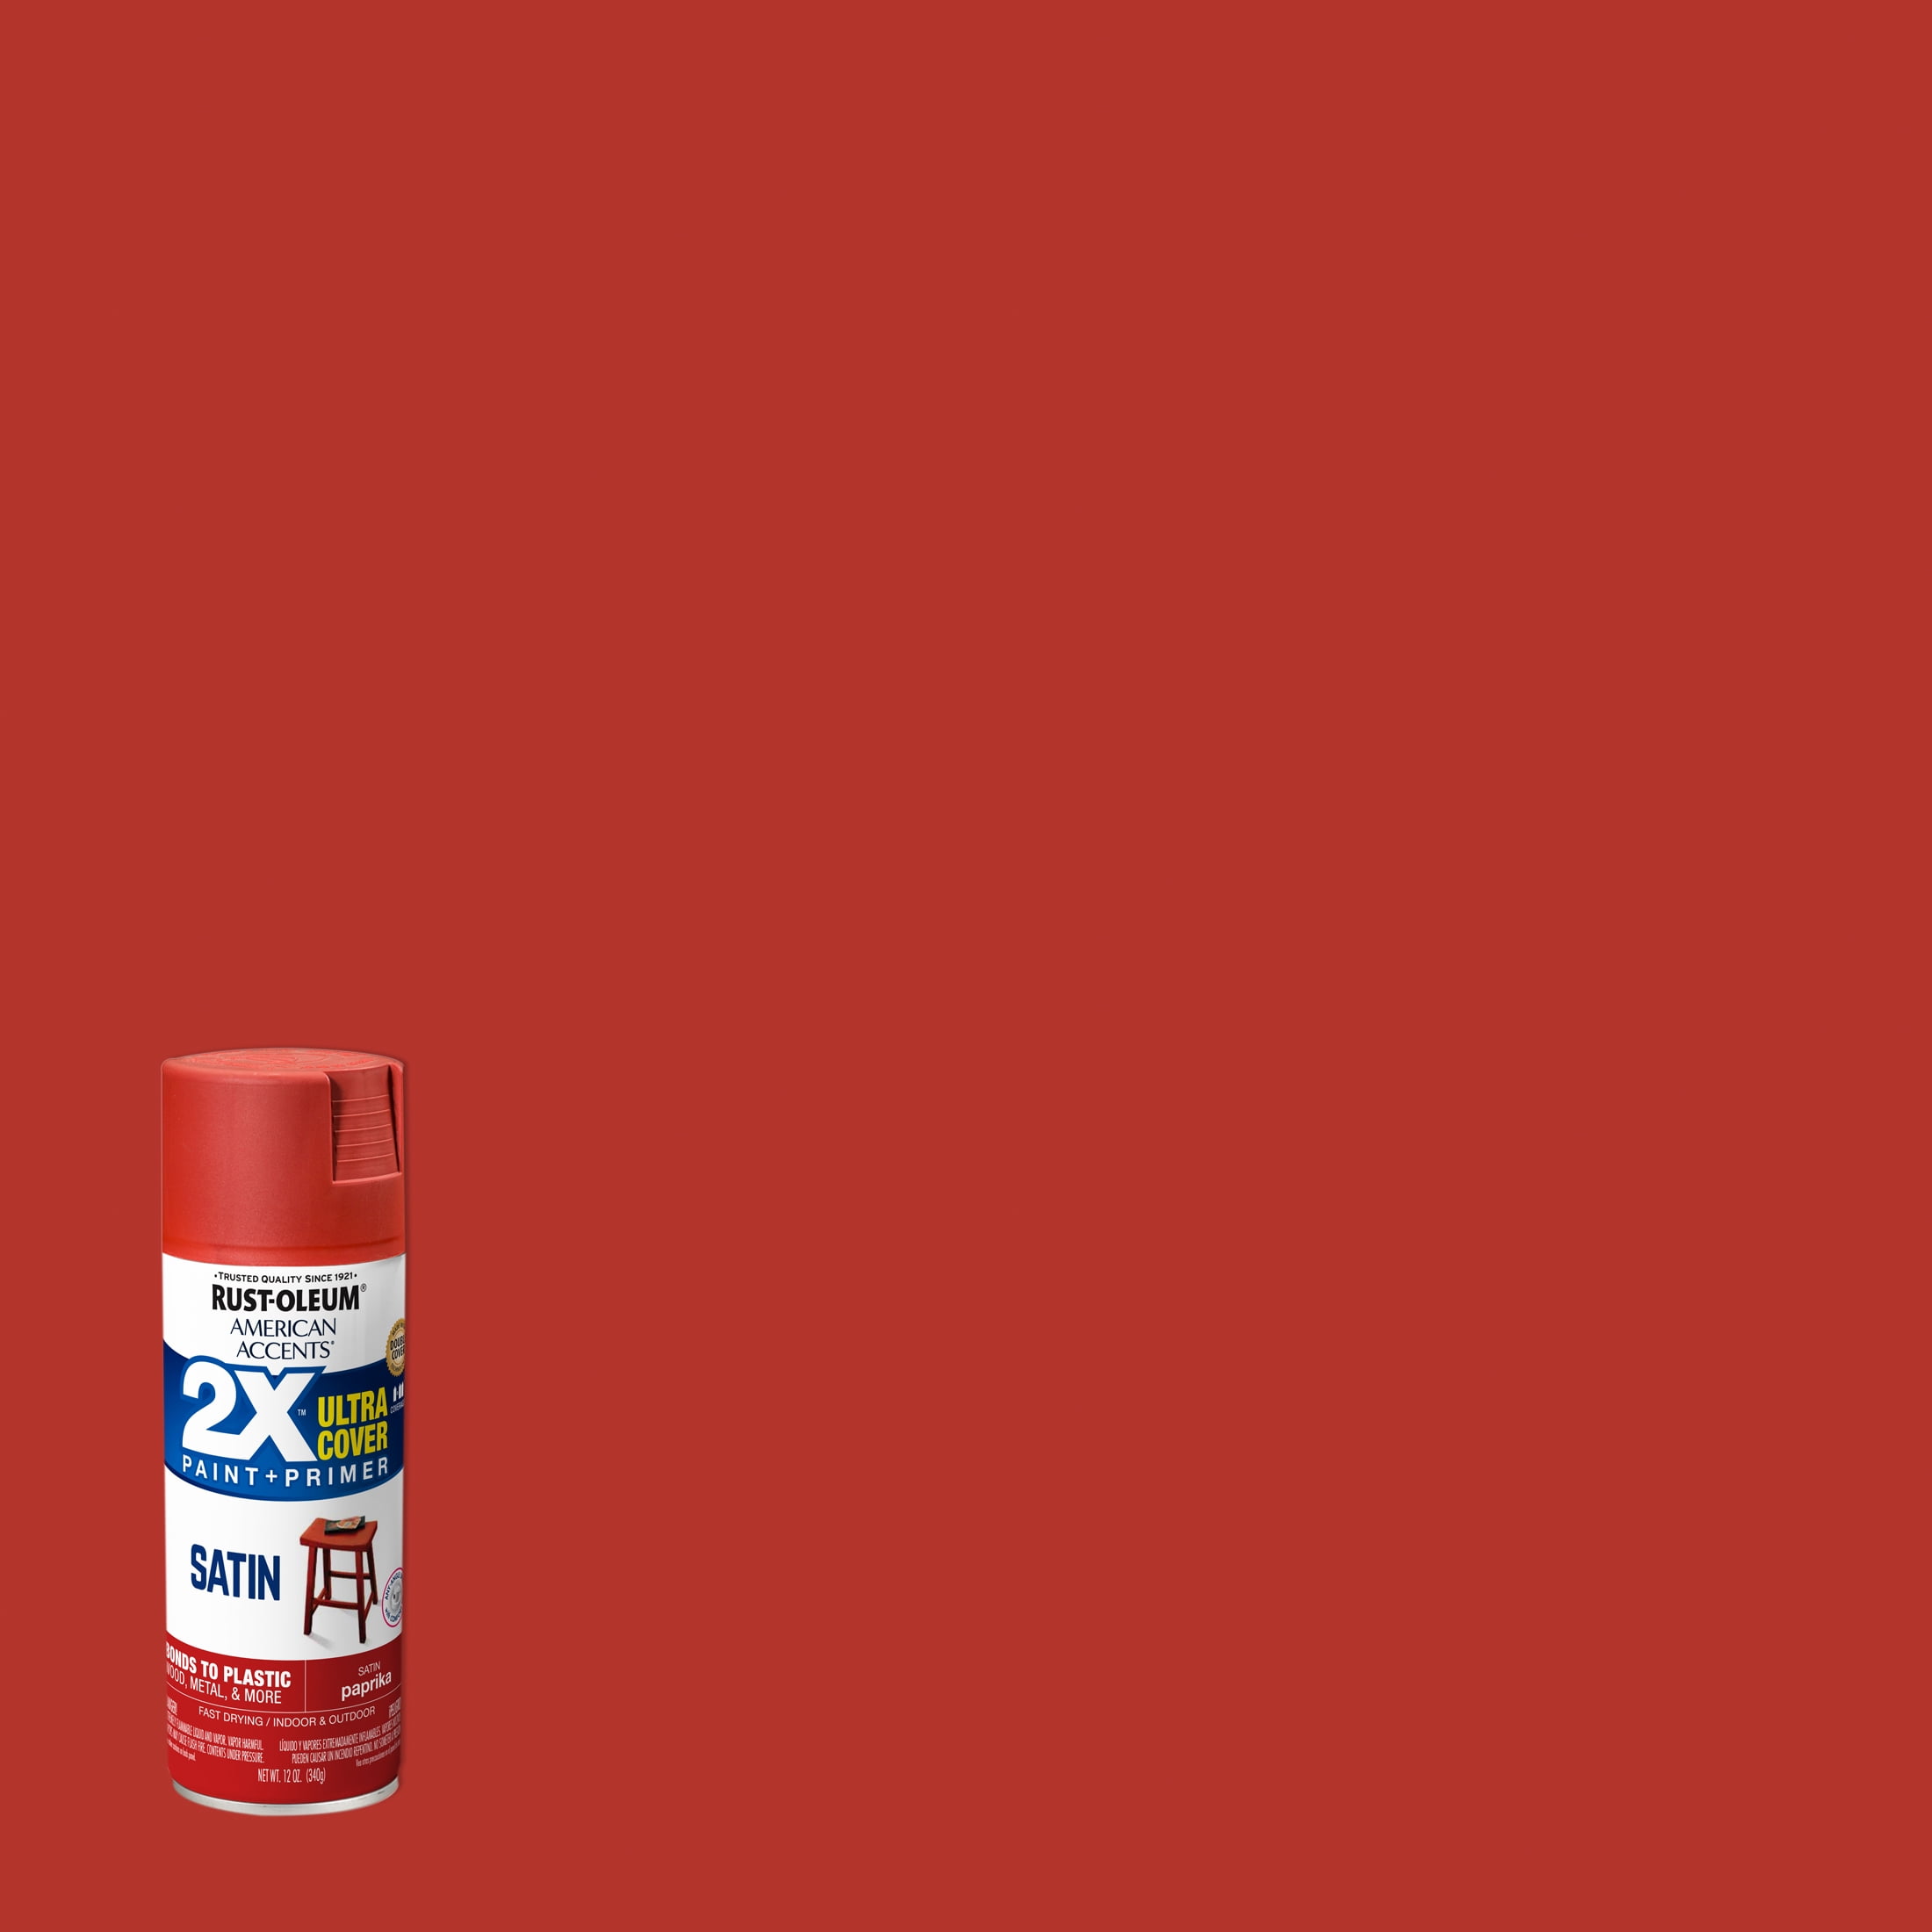 Paprika, Rust-Oleum American Accents 2X Ultra Cover Satin Spray Paint- 12 oz